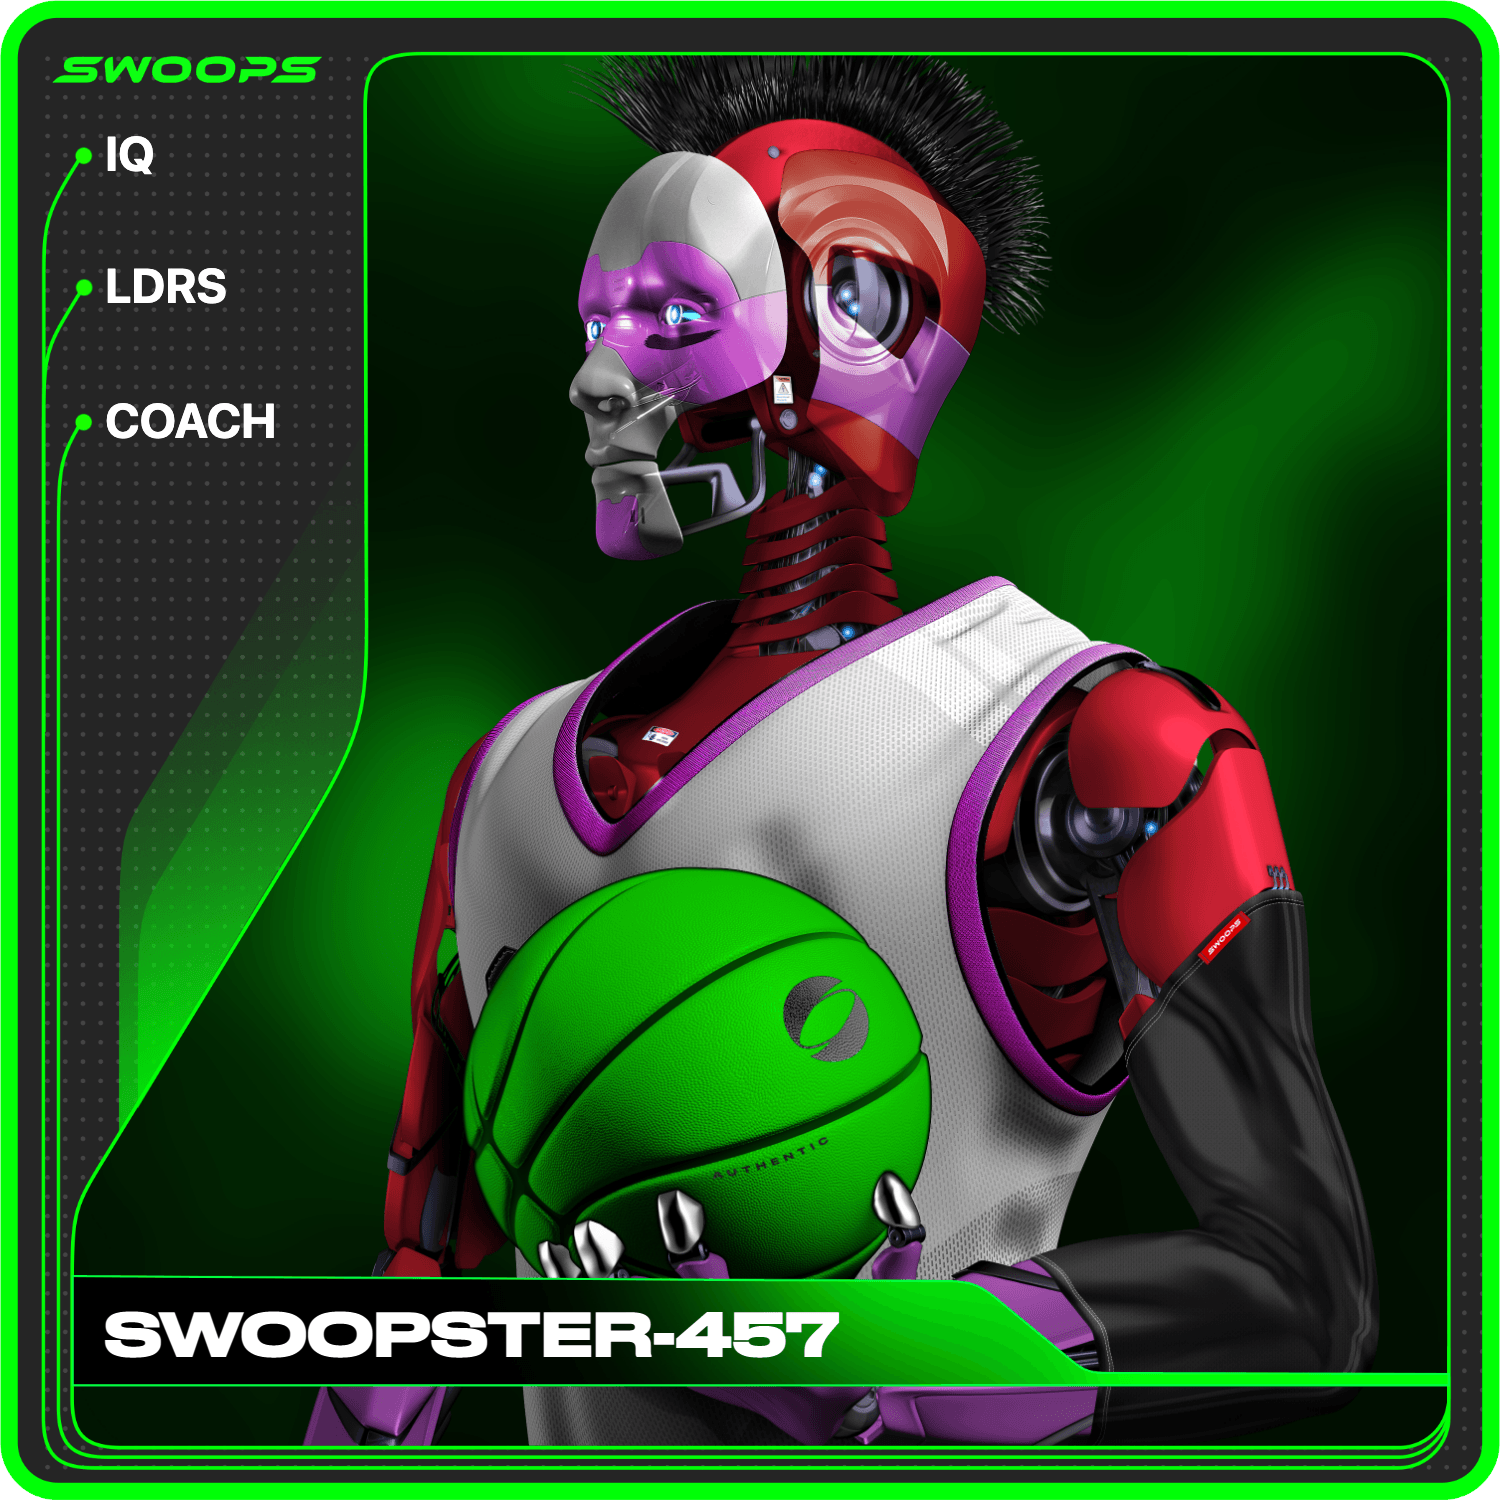 SWOOPSTER-457